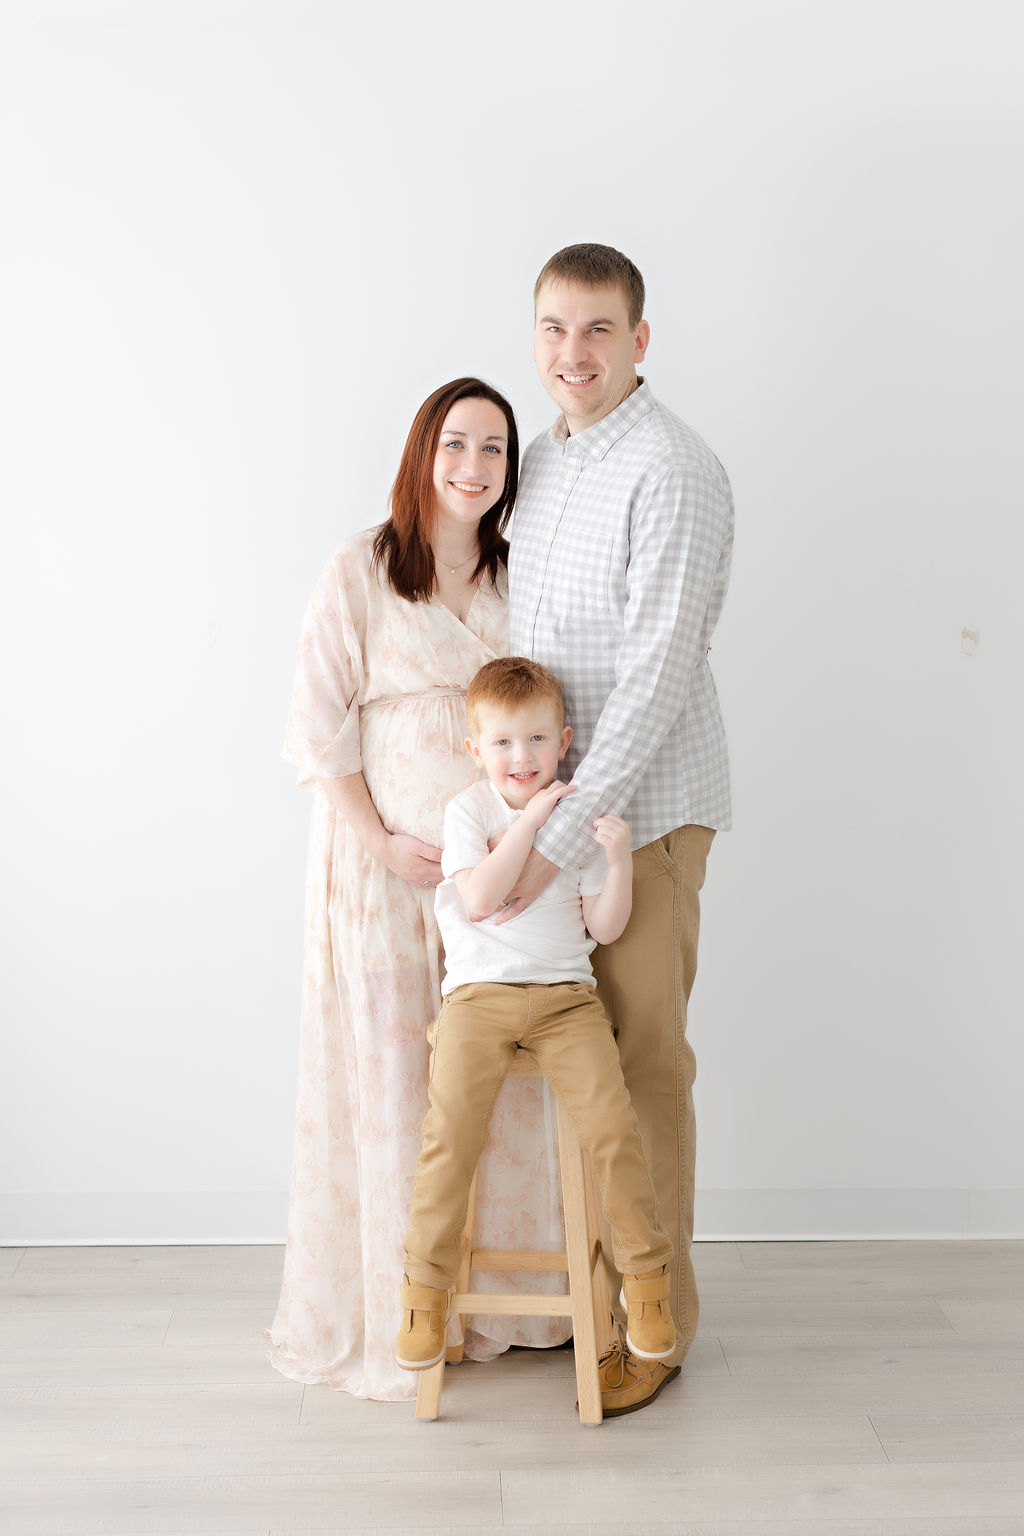 A mother and father stand in a studio with their young son sitting on a wooden stool in front of them